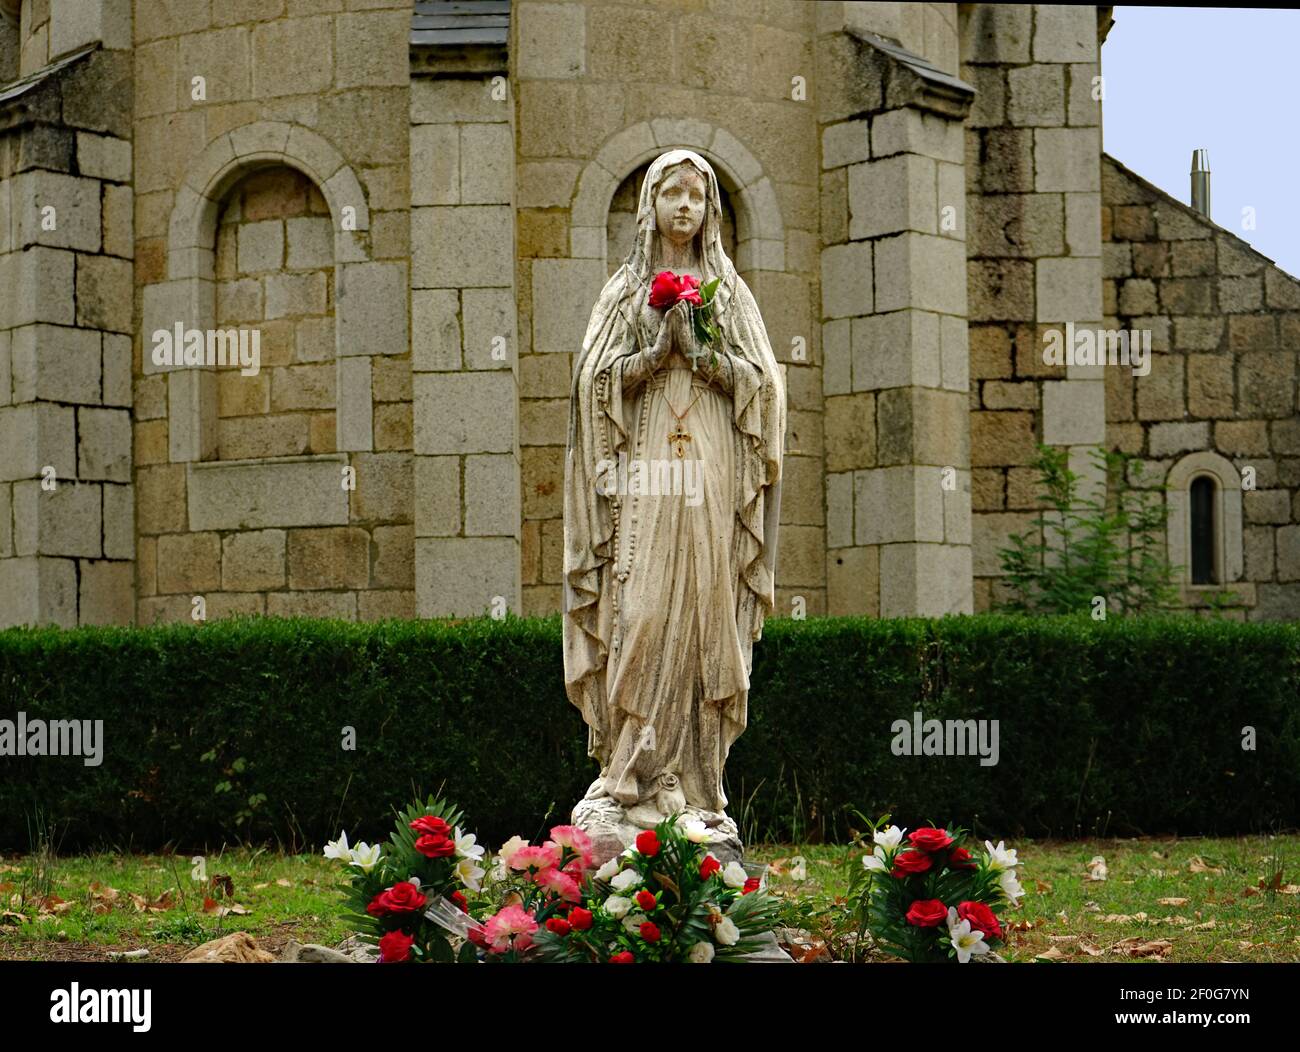 Statue of Our Lady, Ponferrada, Sholy pain in front of a church, local Saint. Stock Photo